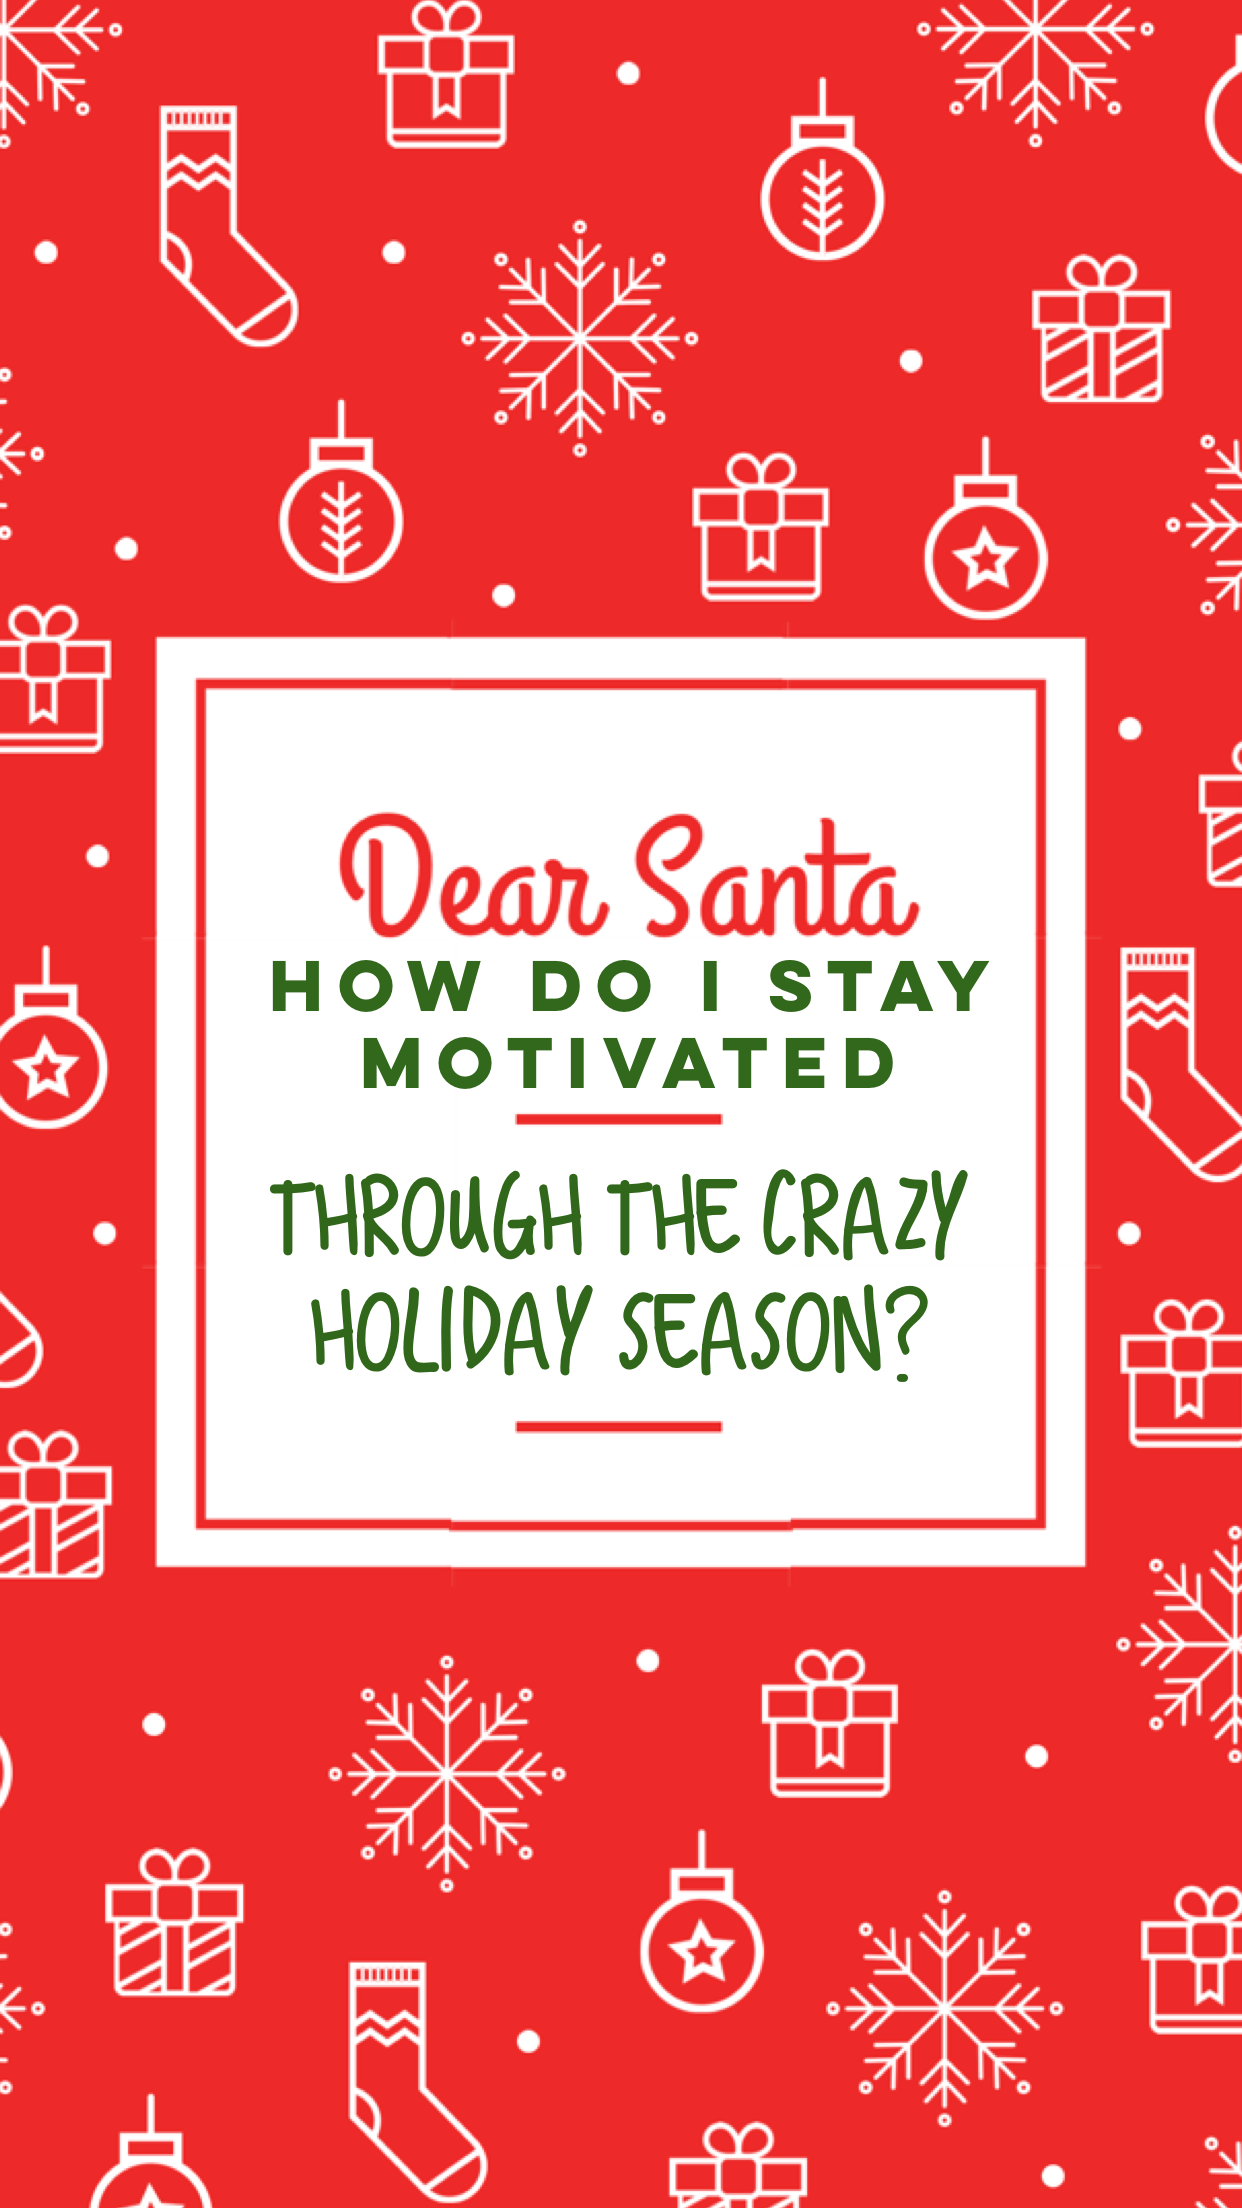 staying motivated through the holidays